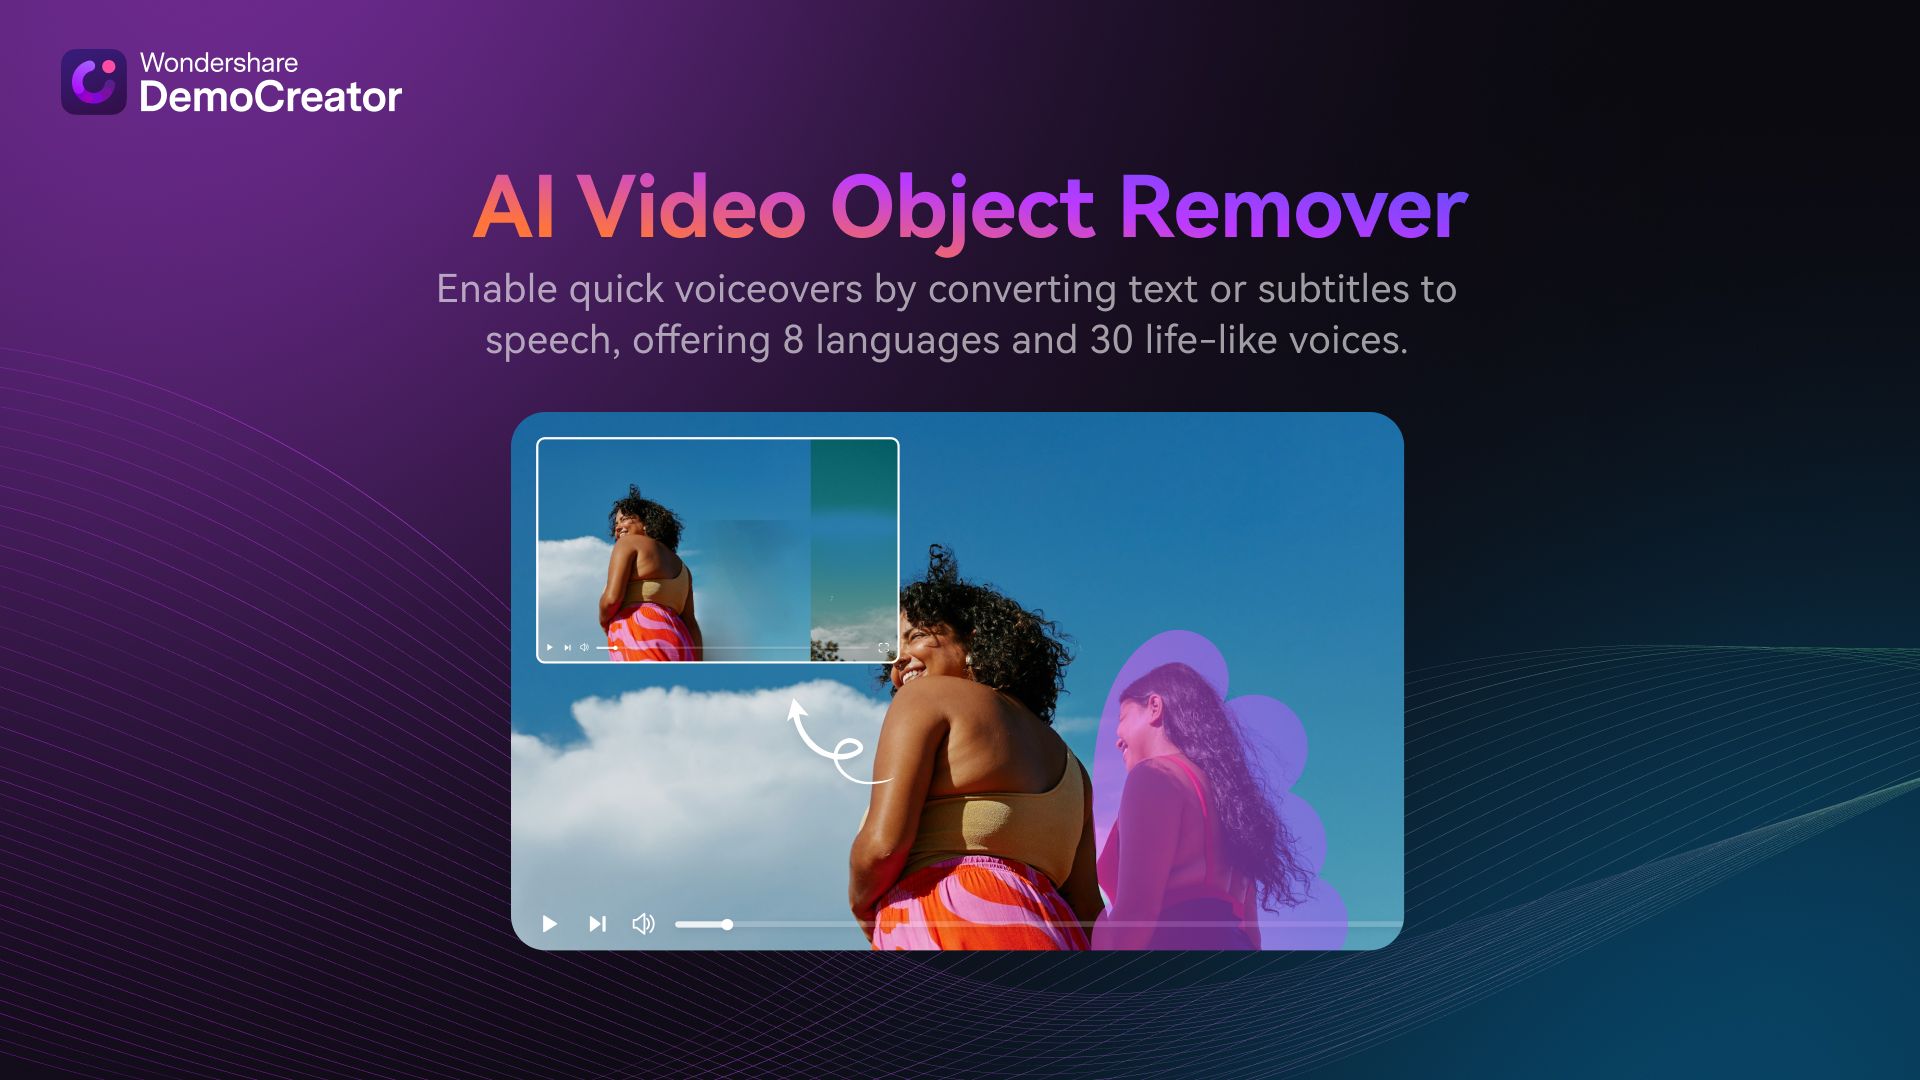 Woman Being Removed for DemoCreator AI Object Remover Feature Showcase